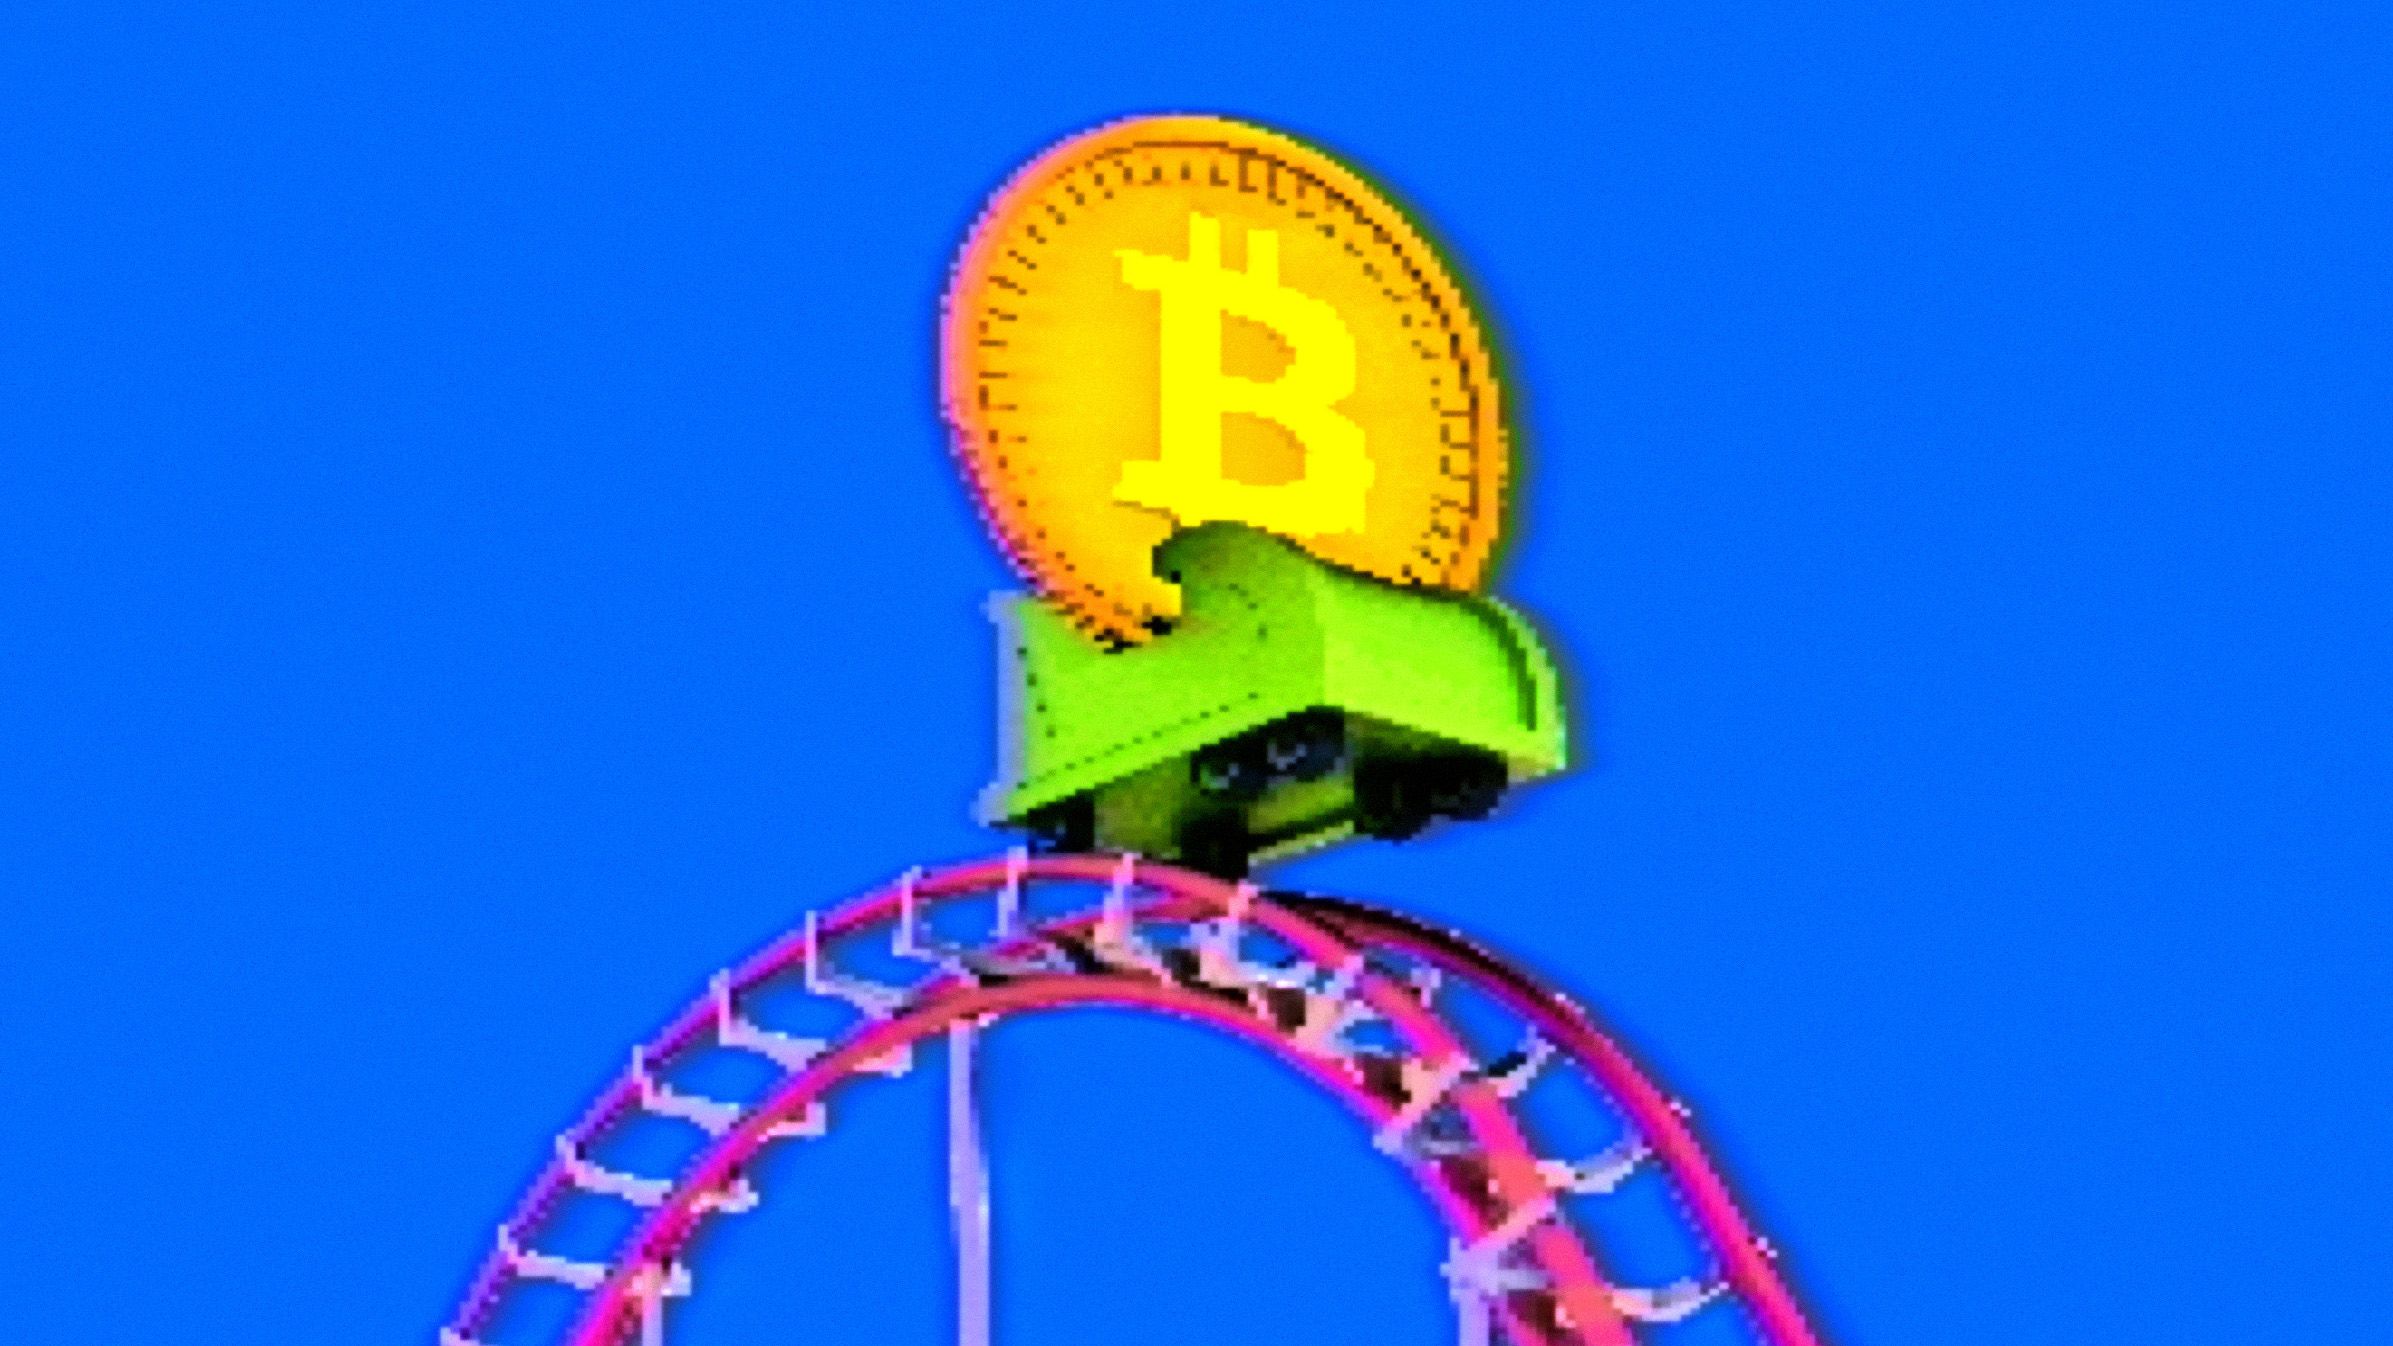 Bitcoin investment simulator: Can you beat the market? – NBC News